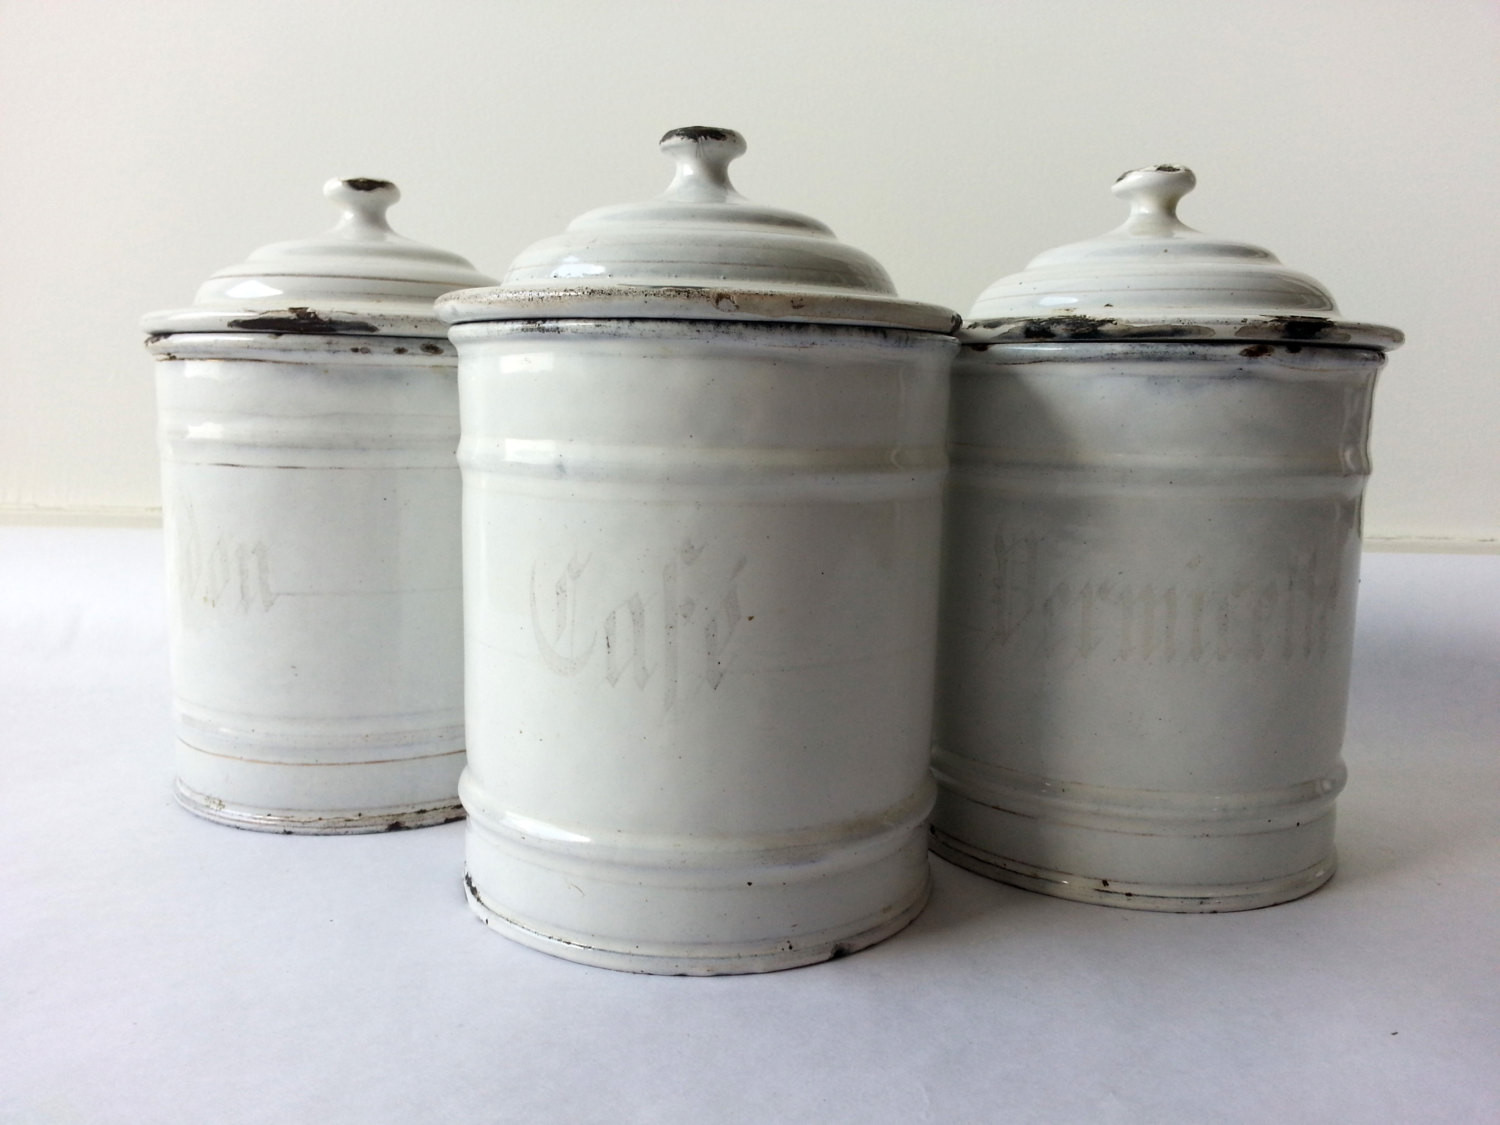 White Kitchen Canisters
 1930 s French Kitchen white CANISTERS SET of 3 French